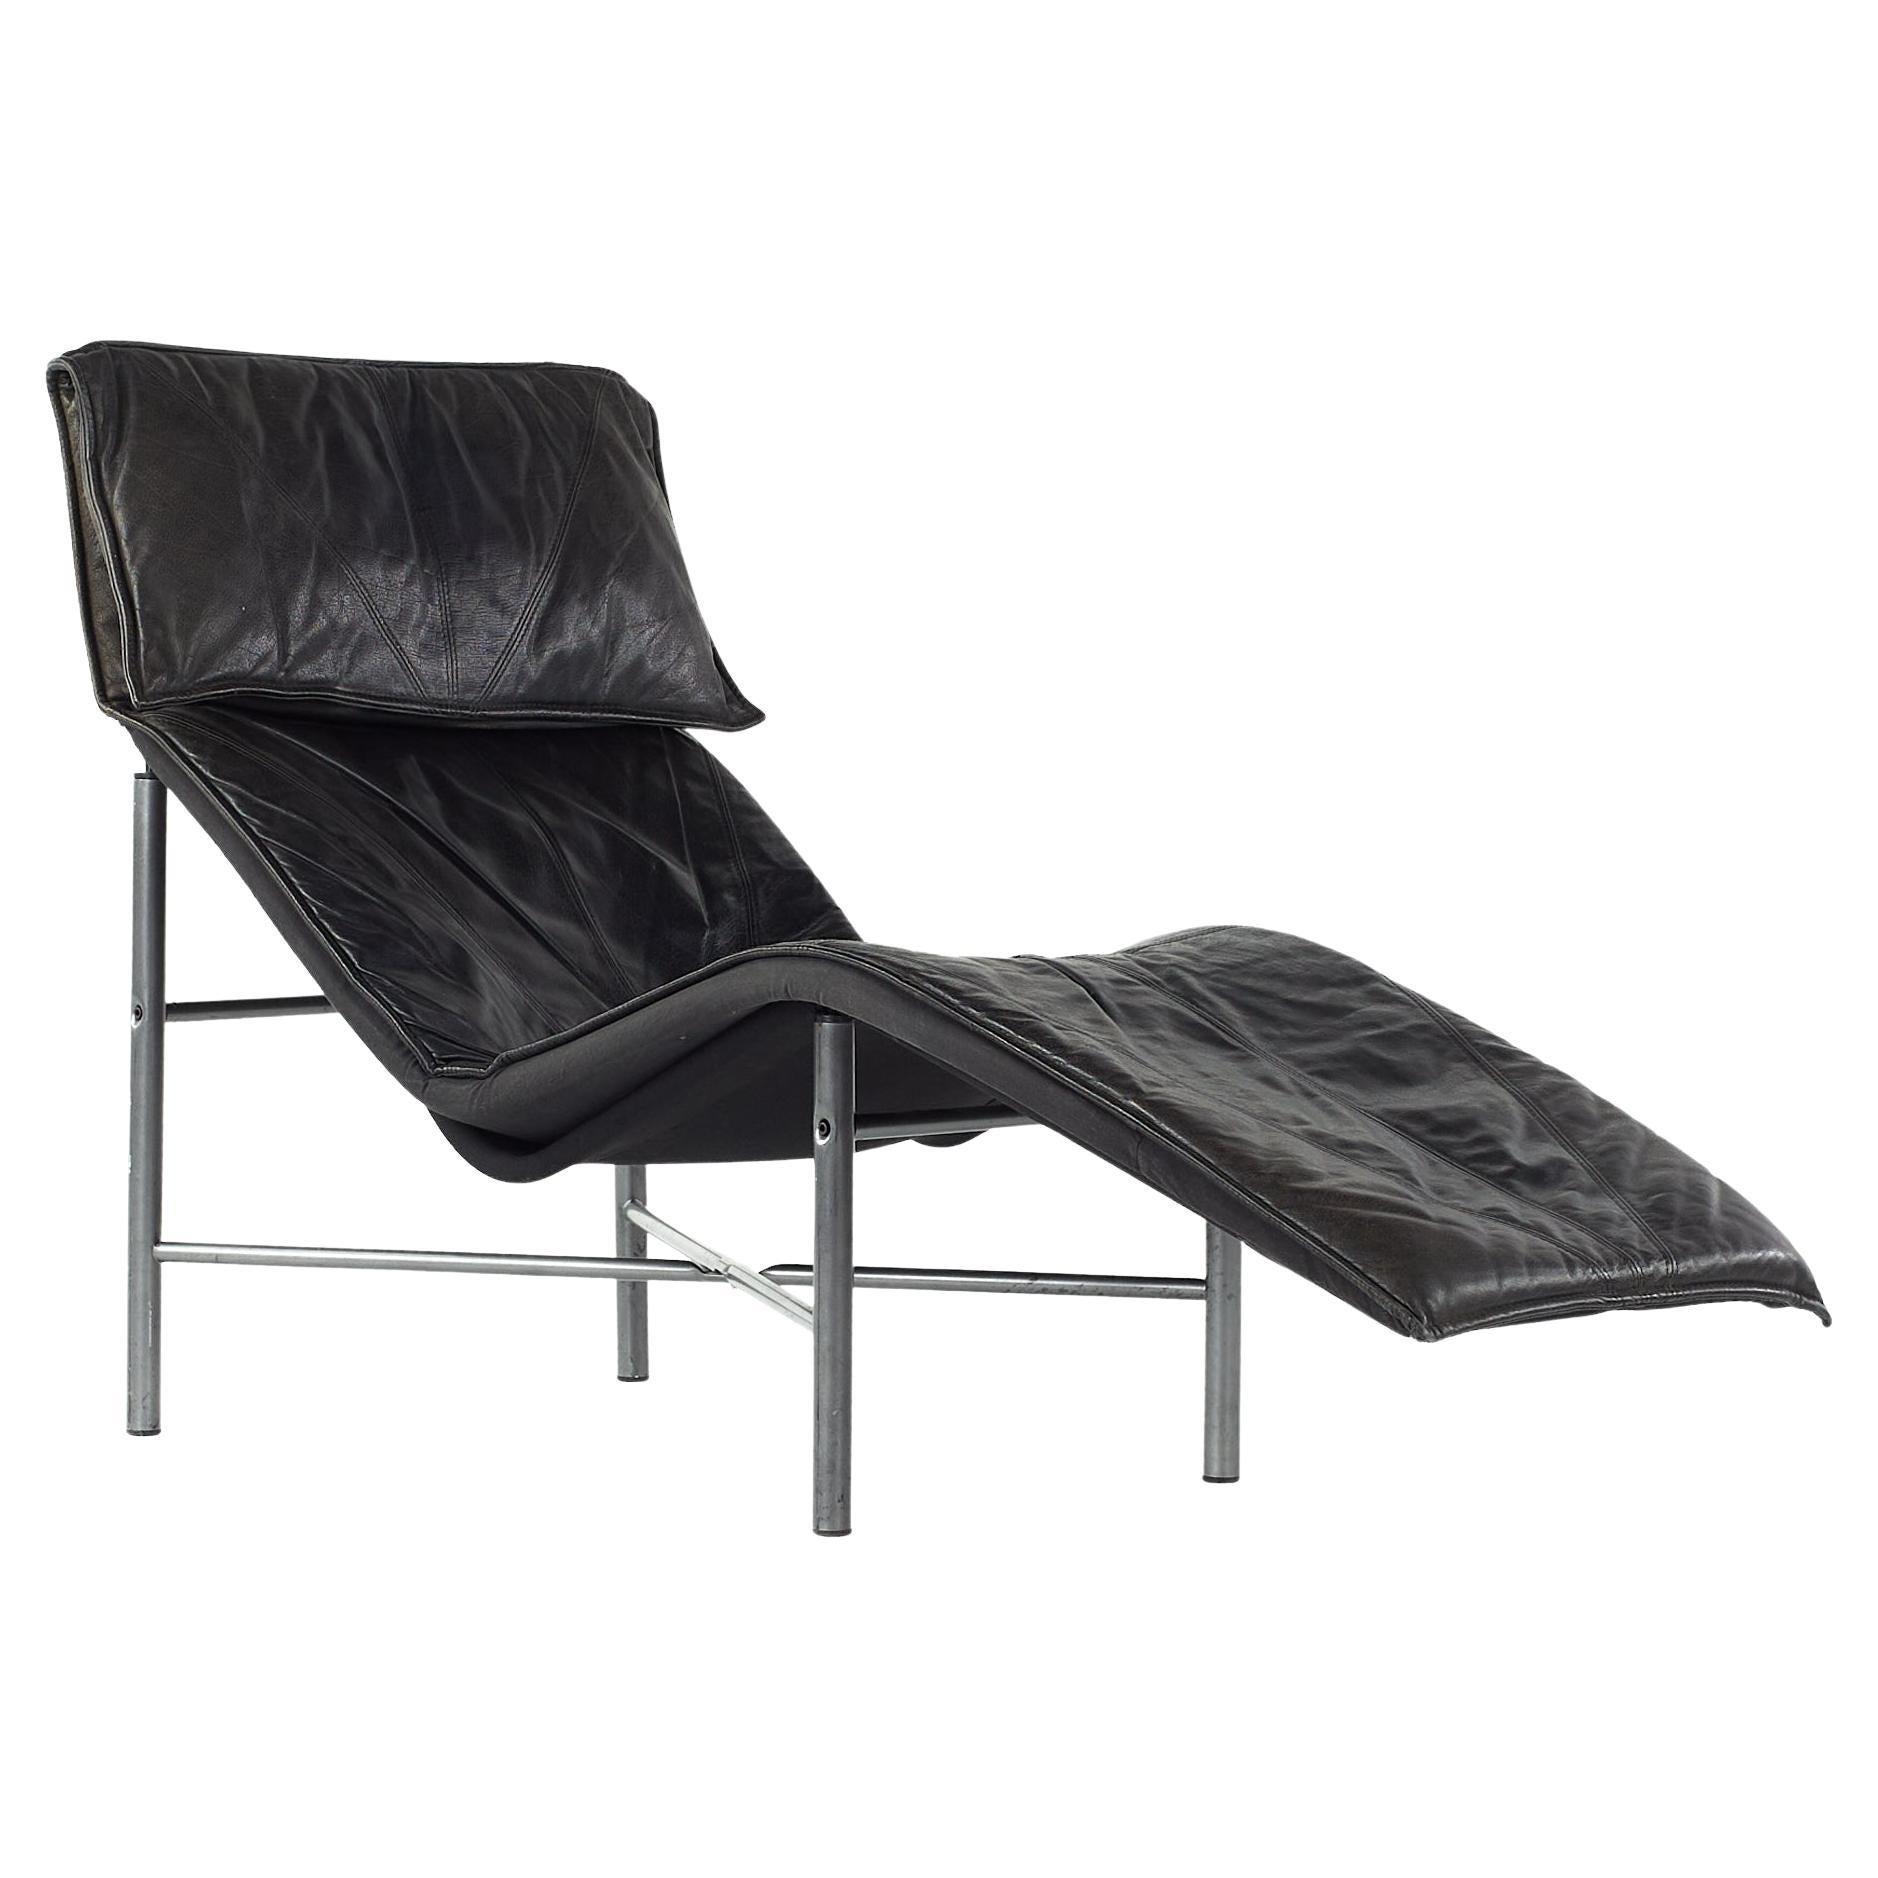 Early Tord Bjorklund for Ikea Midcentury Chaise Lounge en cuir